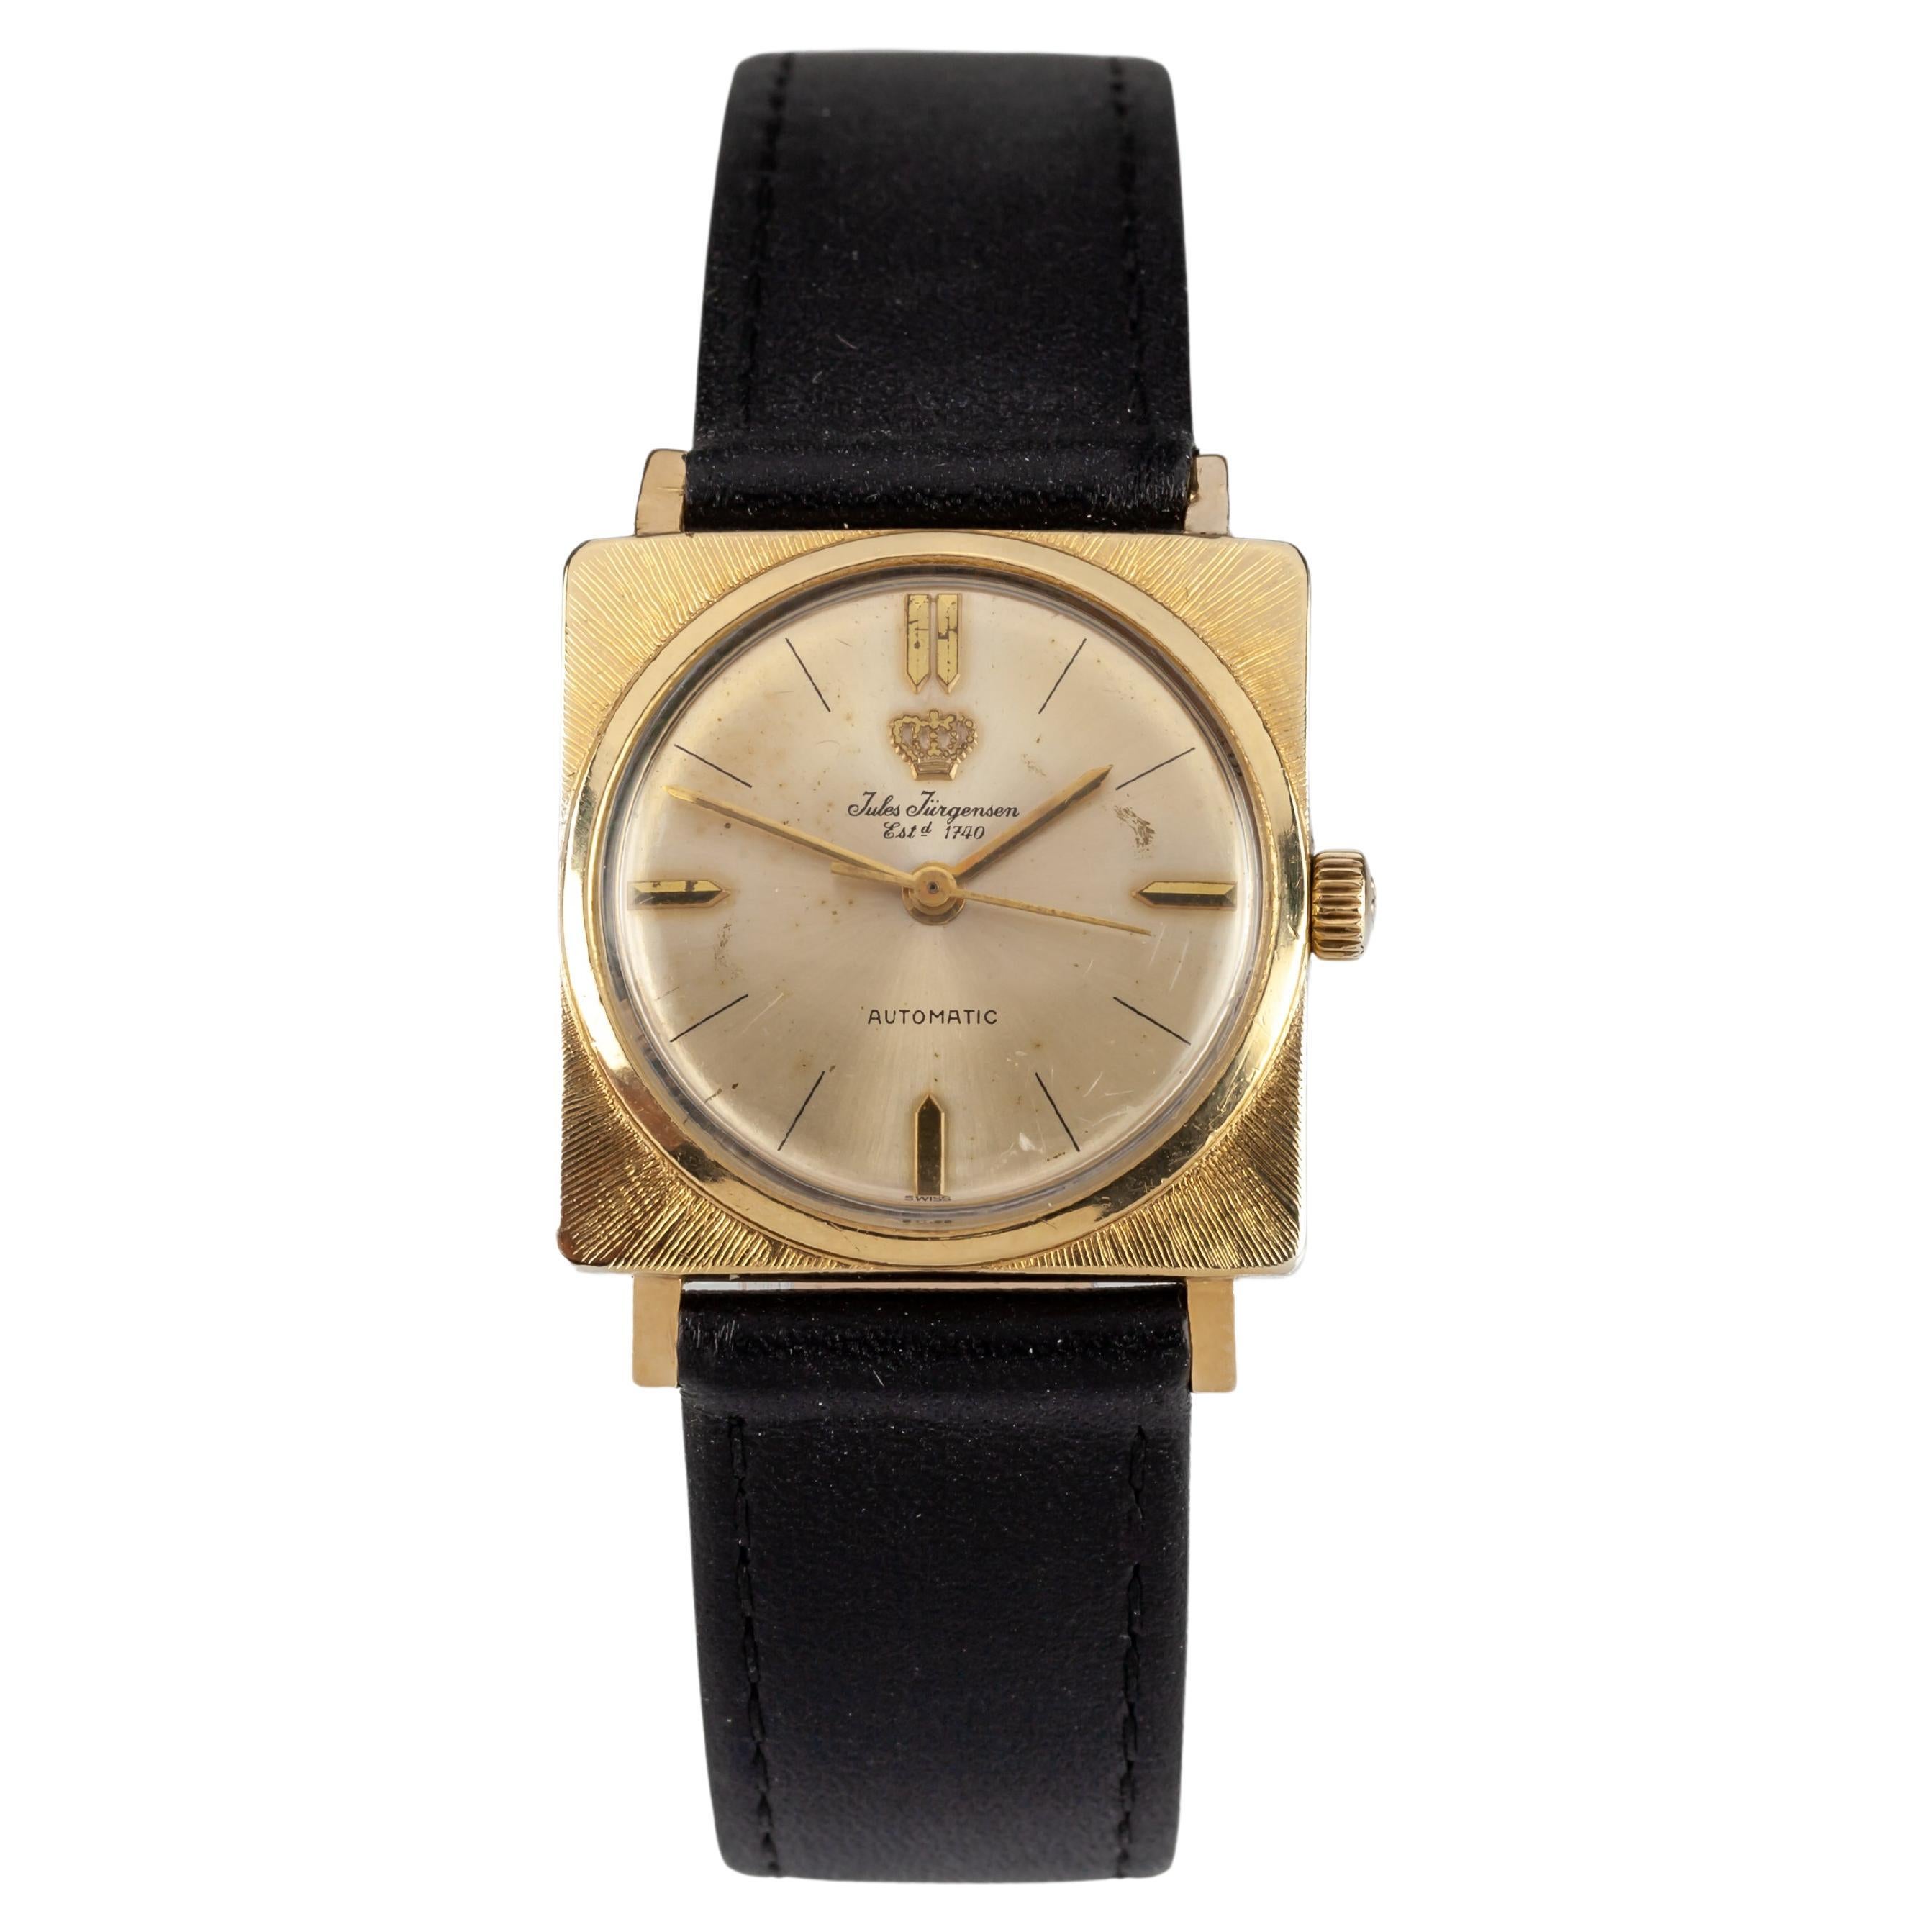 Vintage 14k Yellow Gold Jules Jurgensen Automatic Watch w/ Champagne Dial For Sale